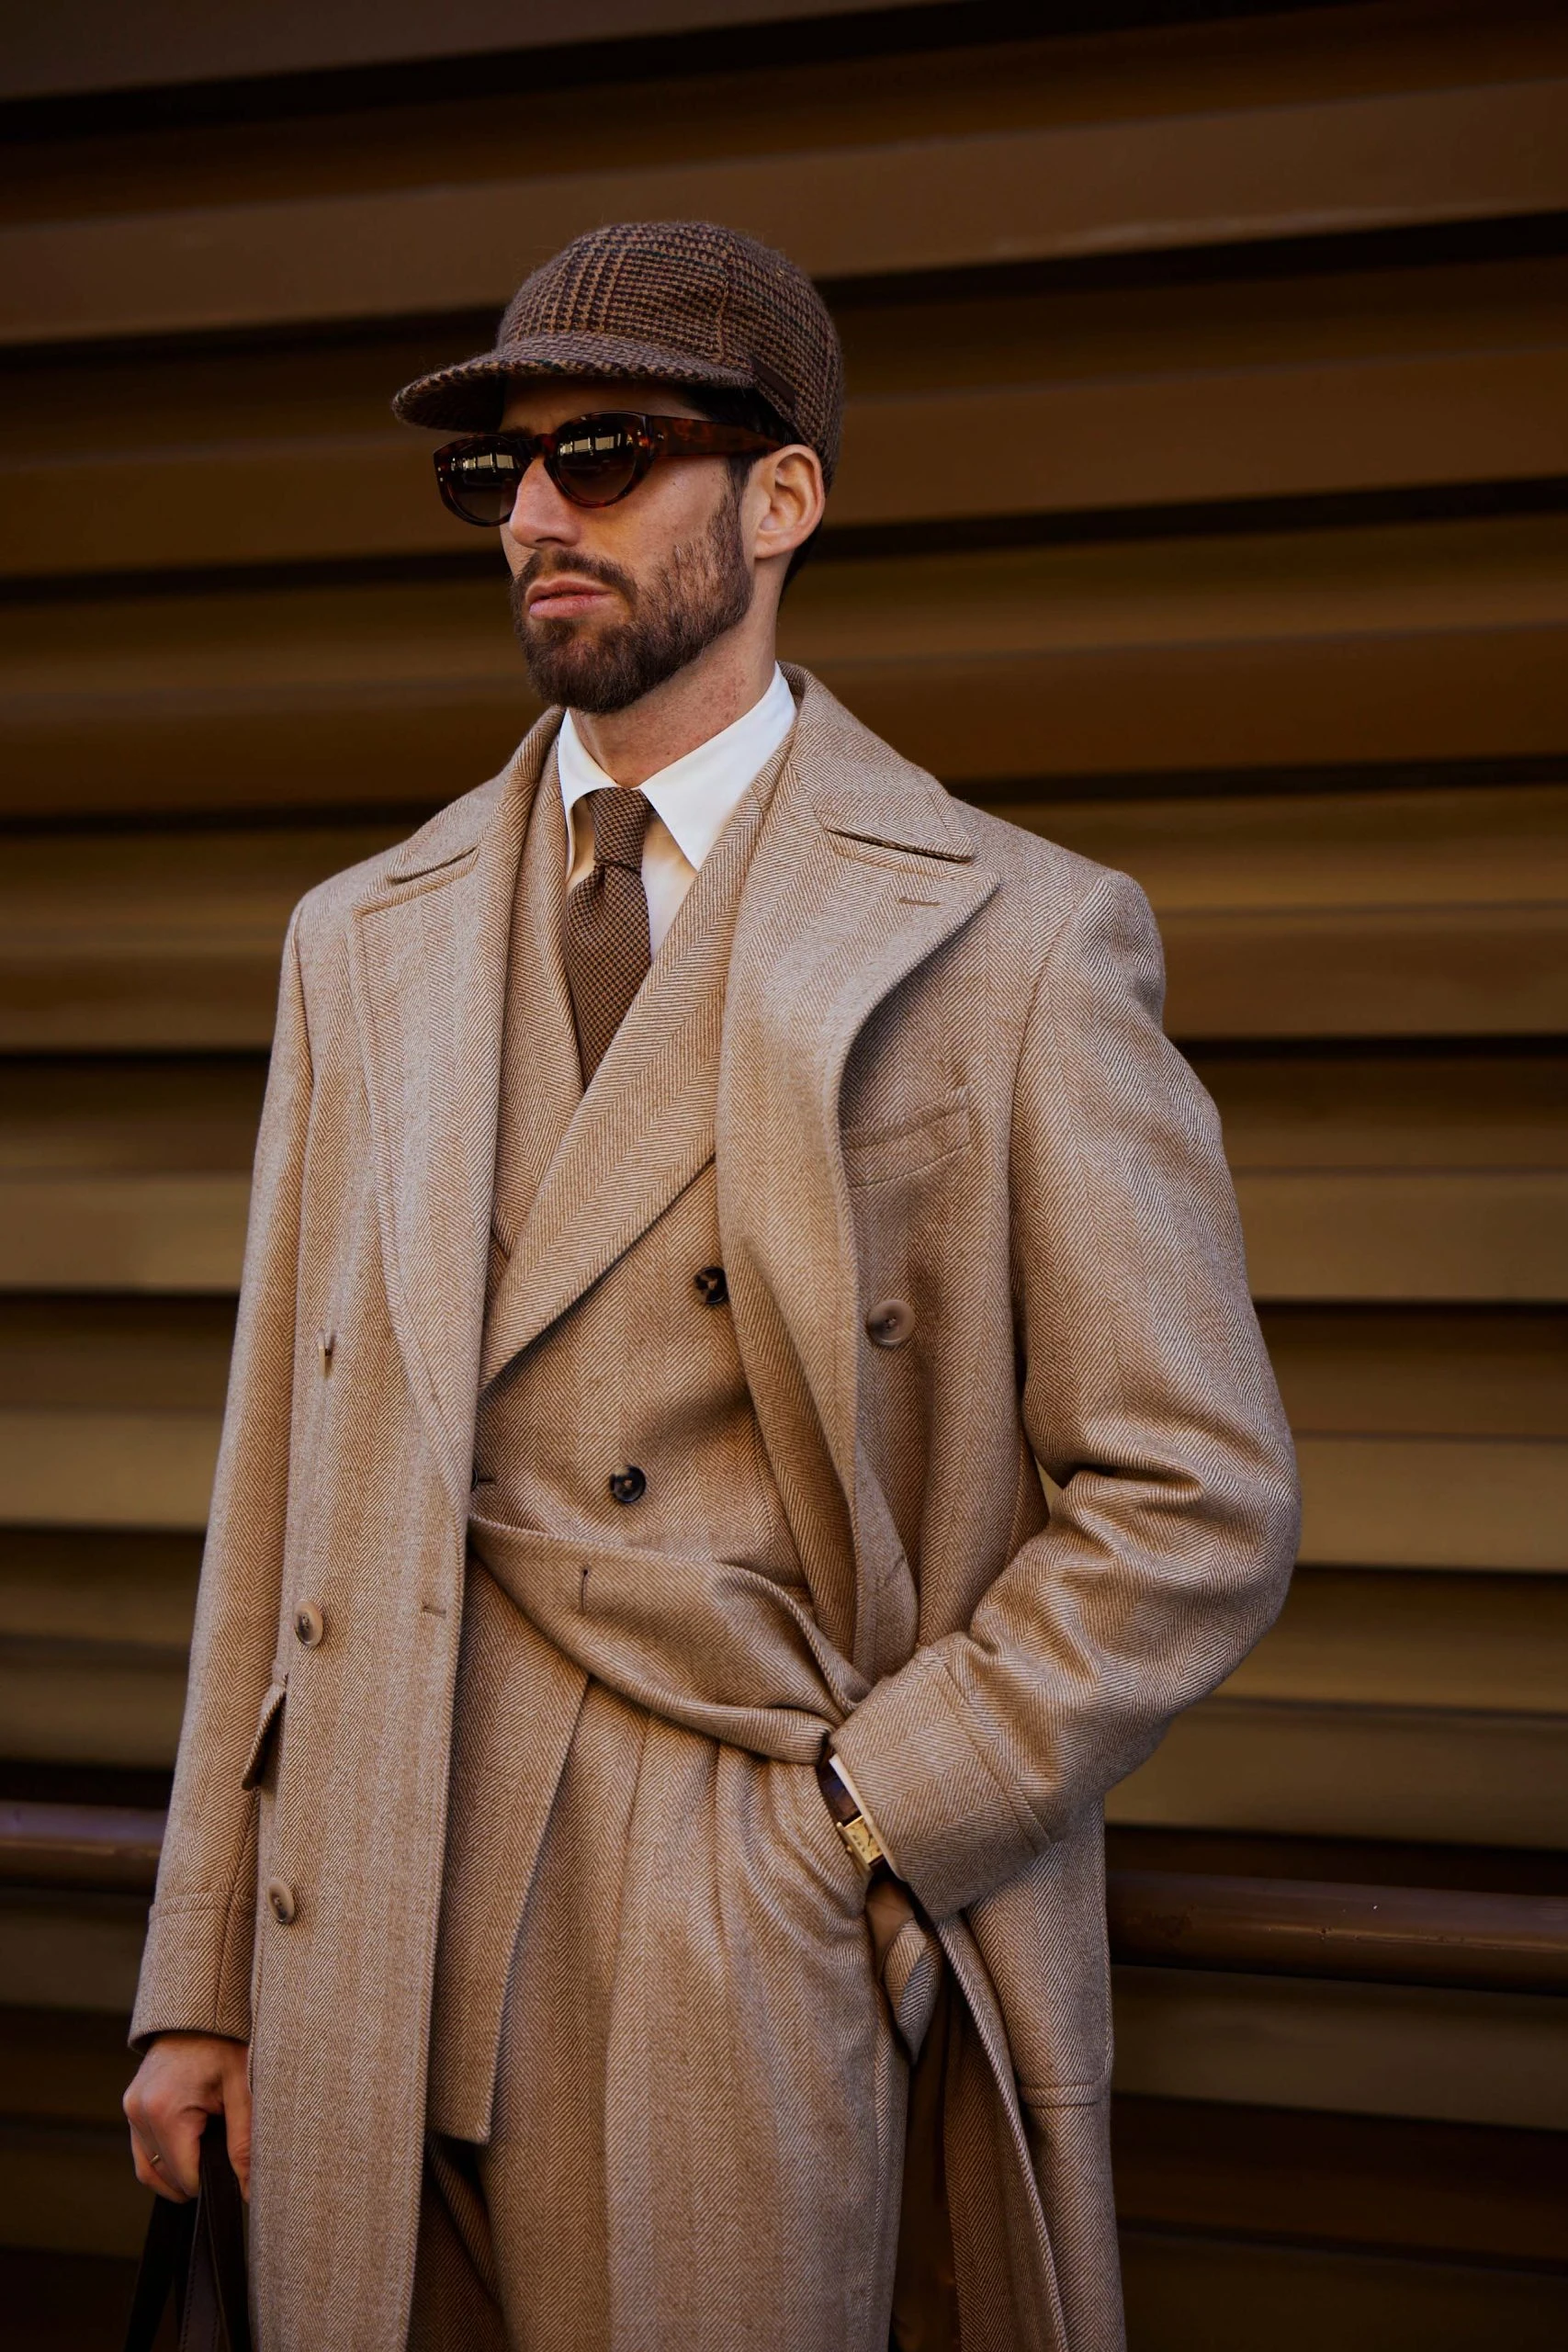 carlos domord at pitti uomo wearing a custom made herringbone mond suit and overcoat